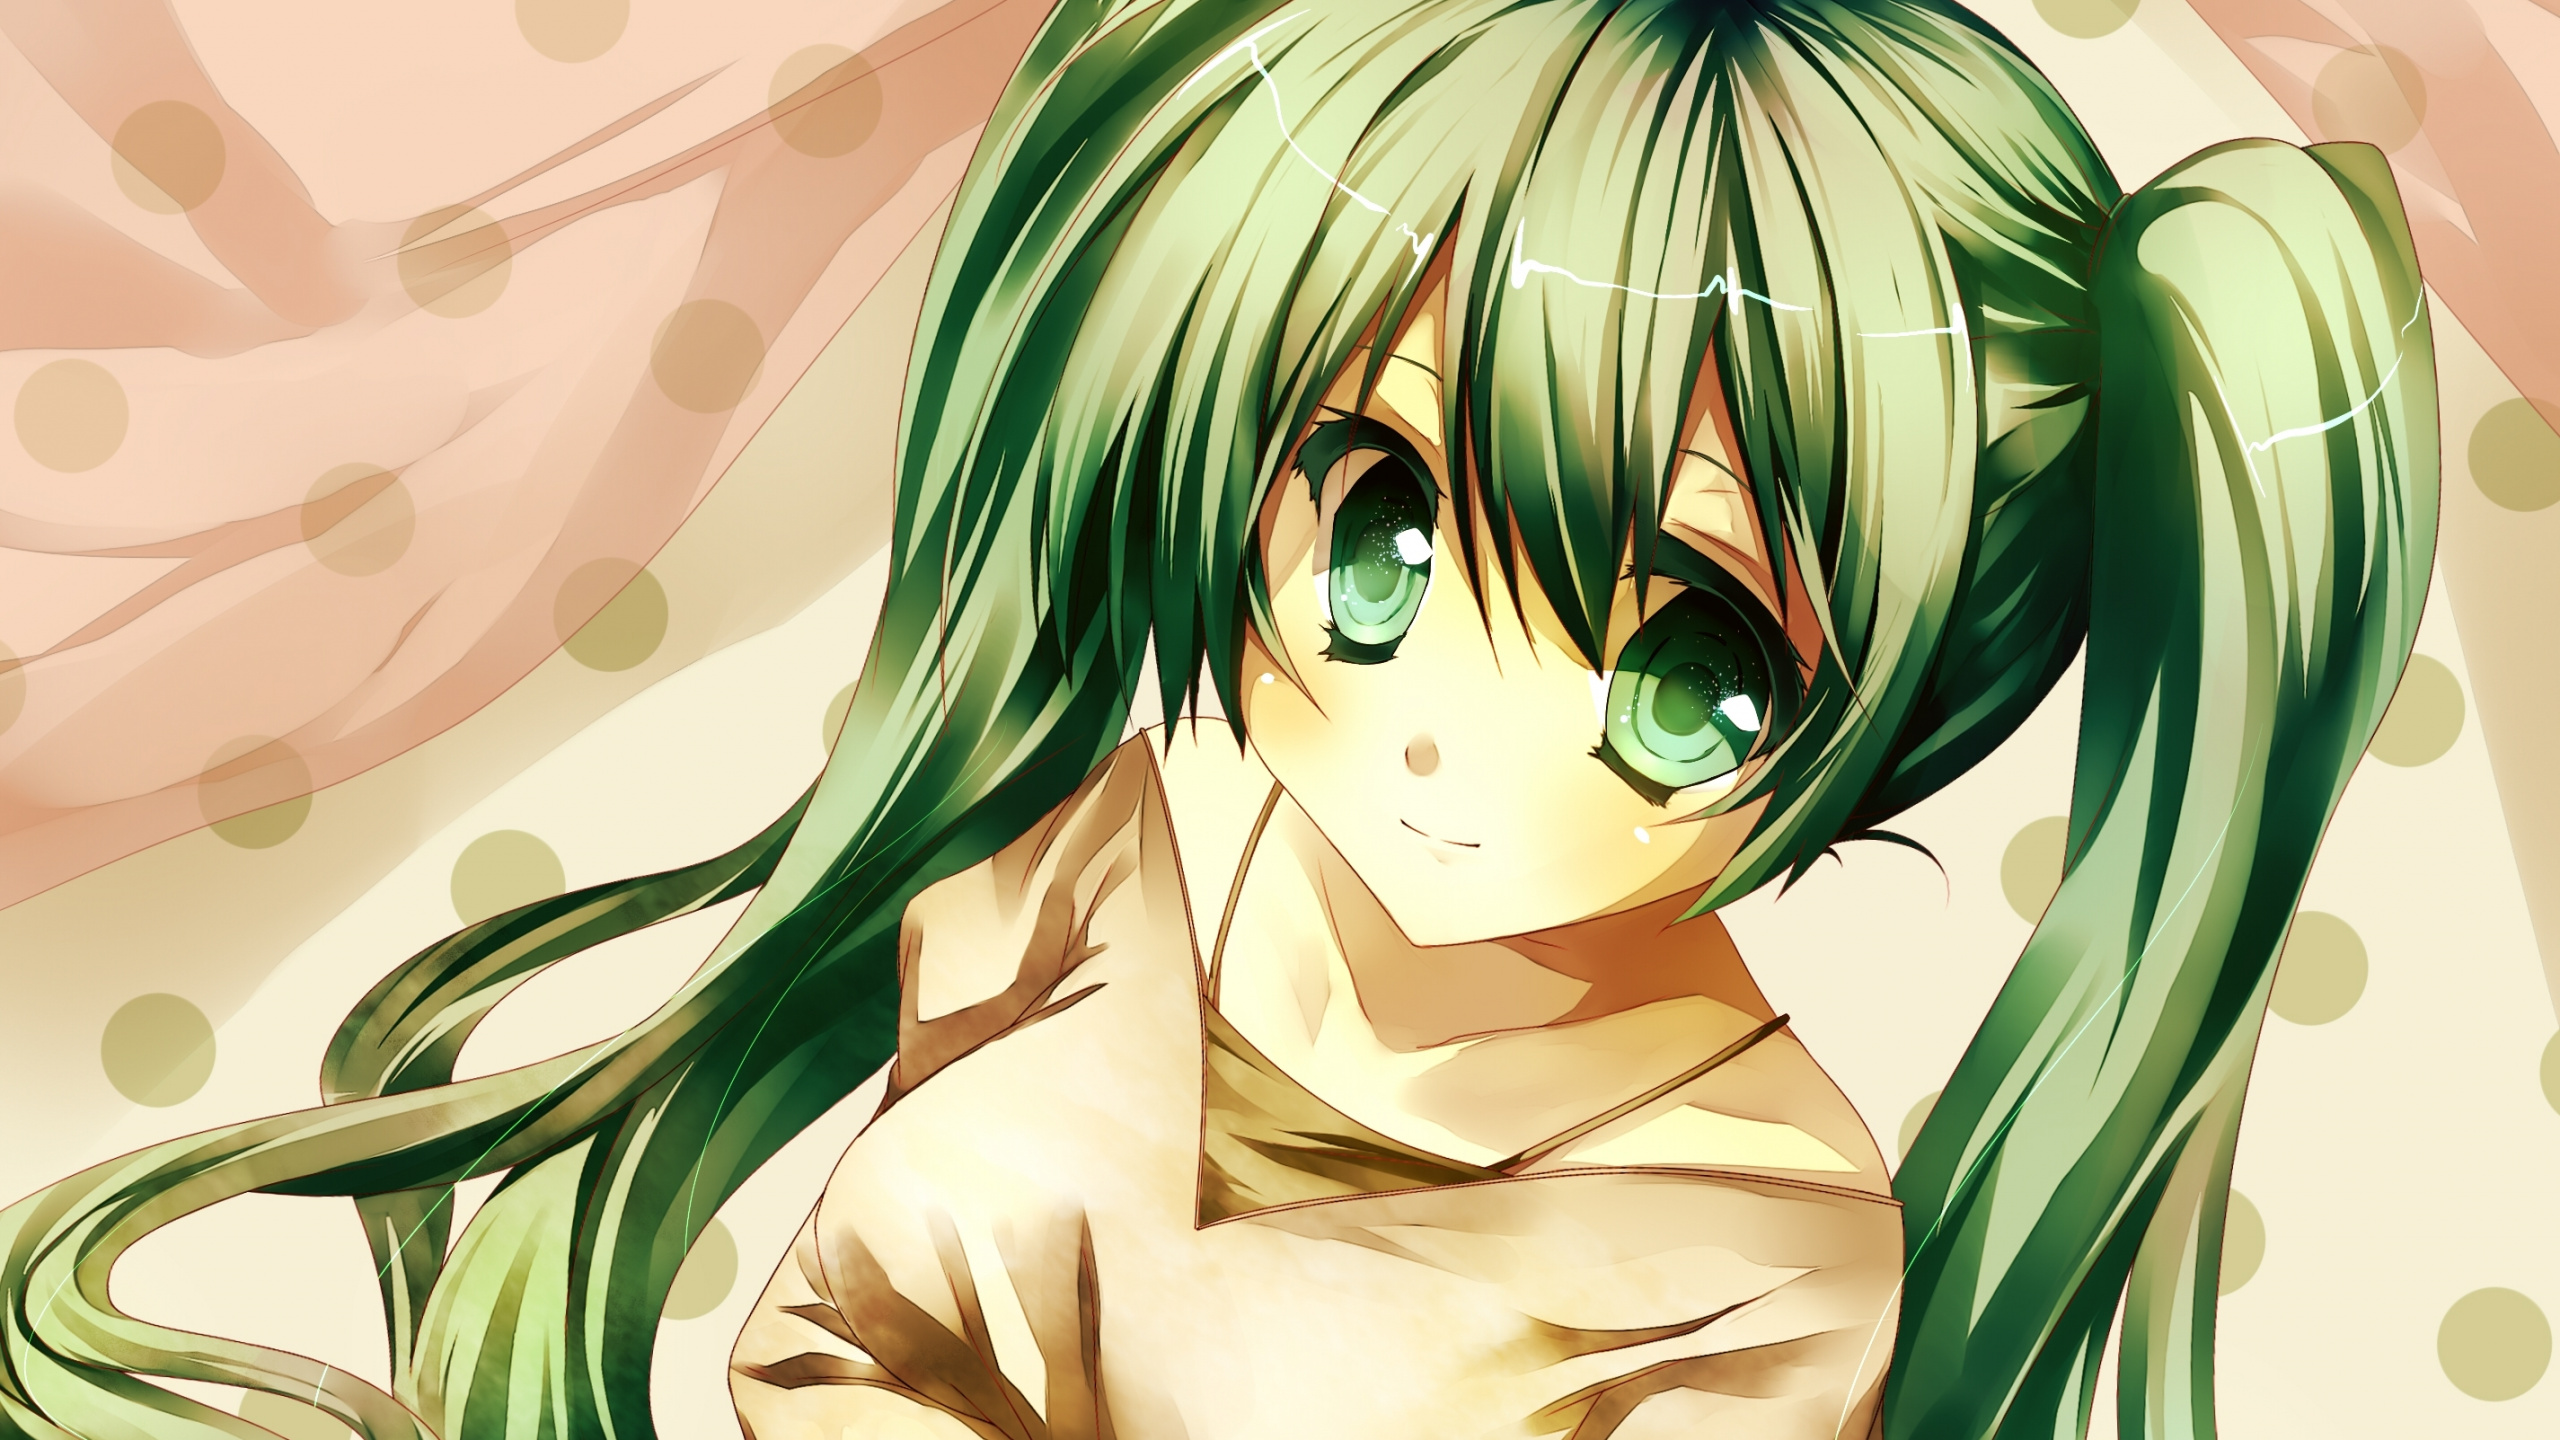 Personnage D'anime Masculin Aux Cheveux Verts. Wallpaper in 2560x1440 Resolution